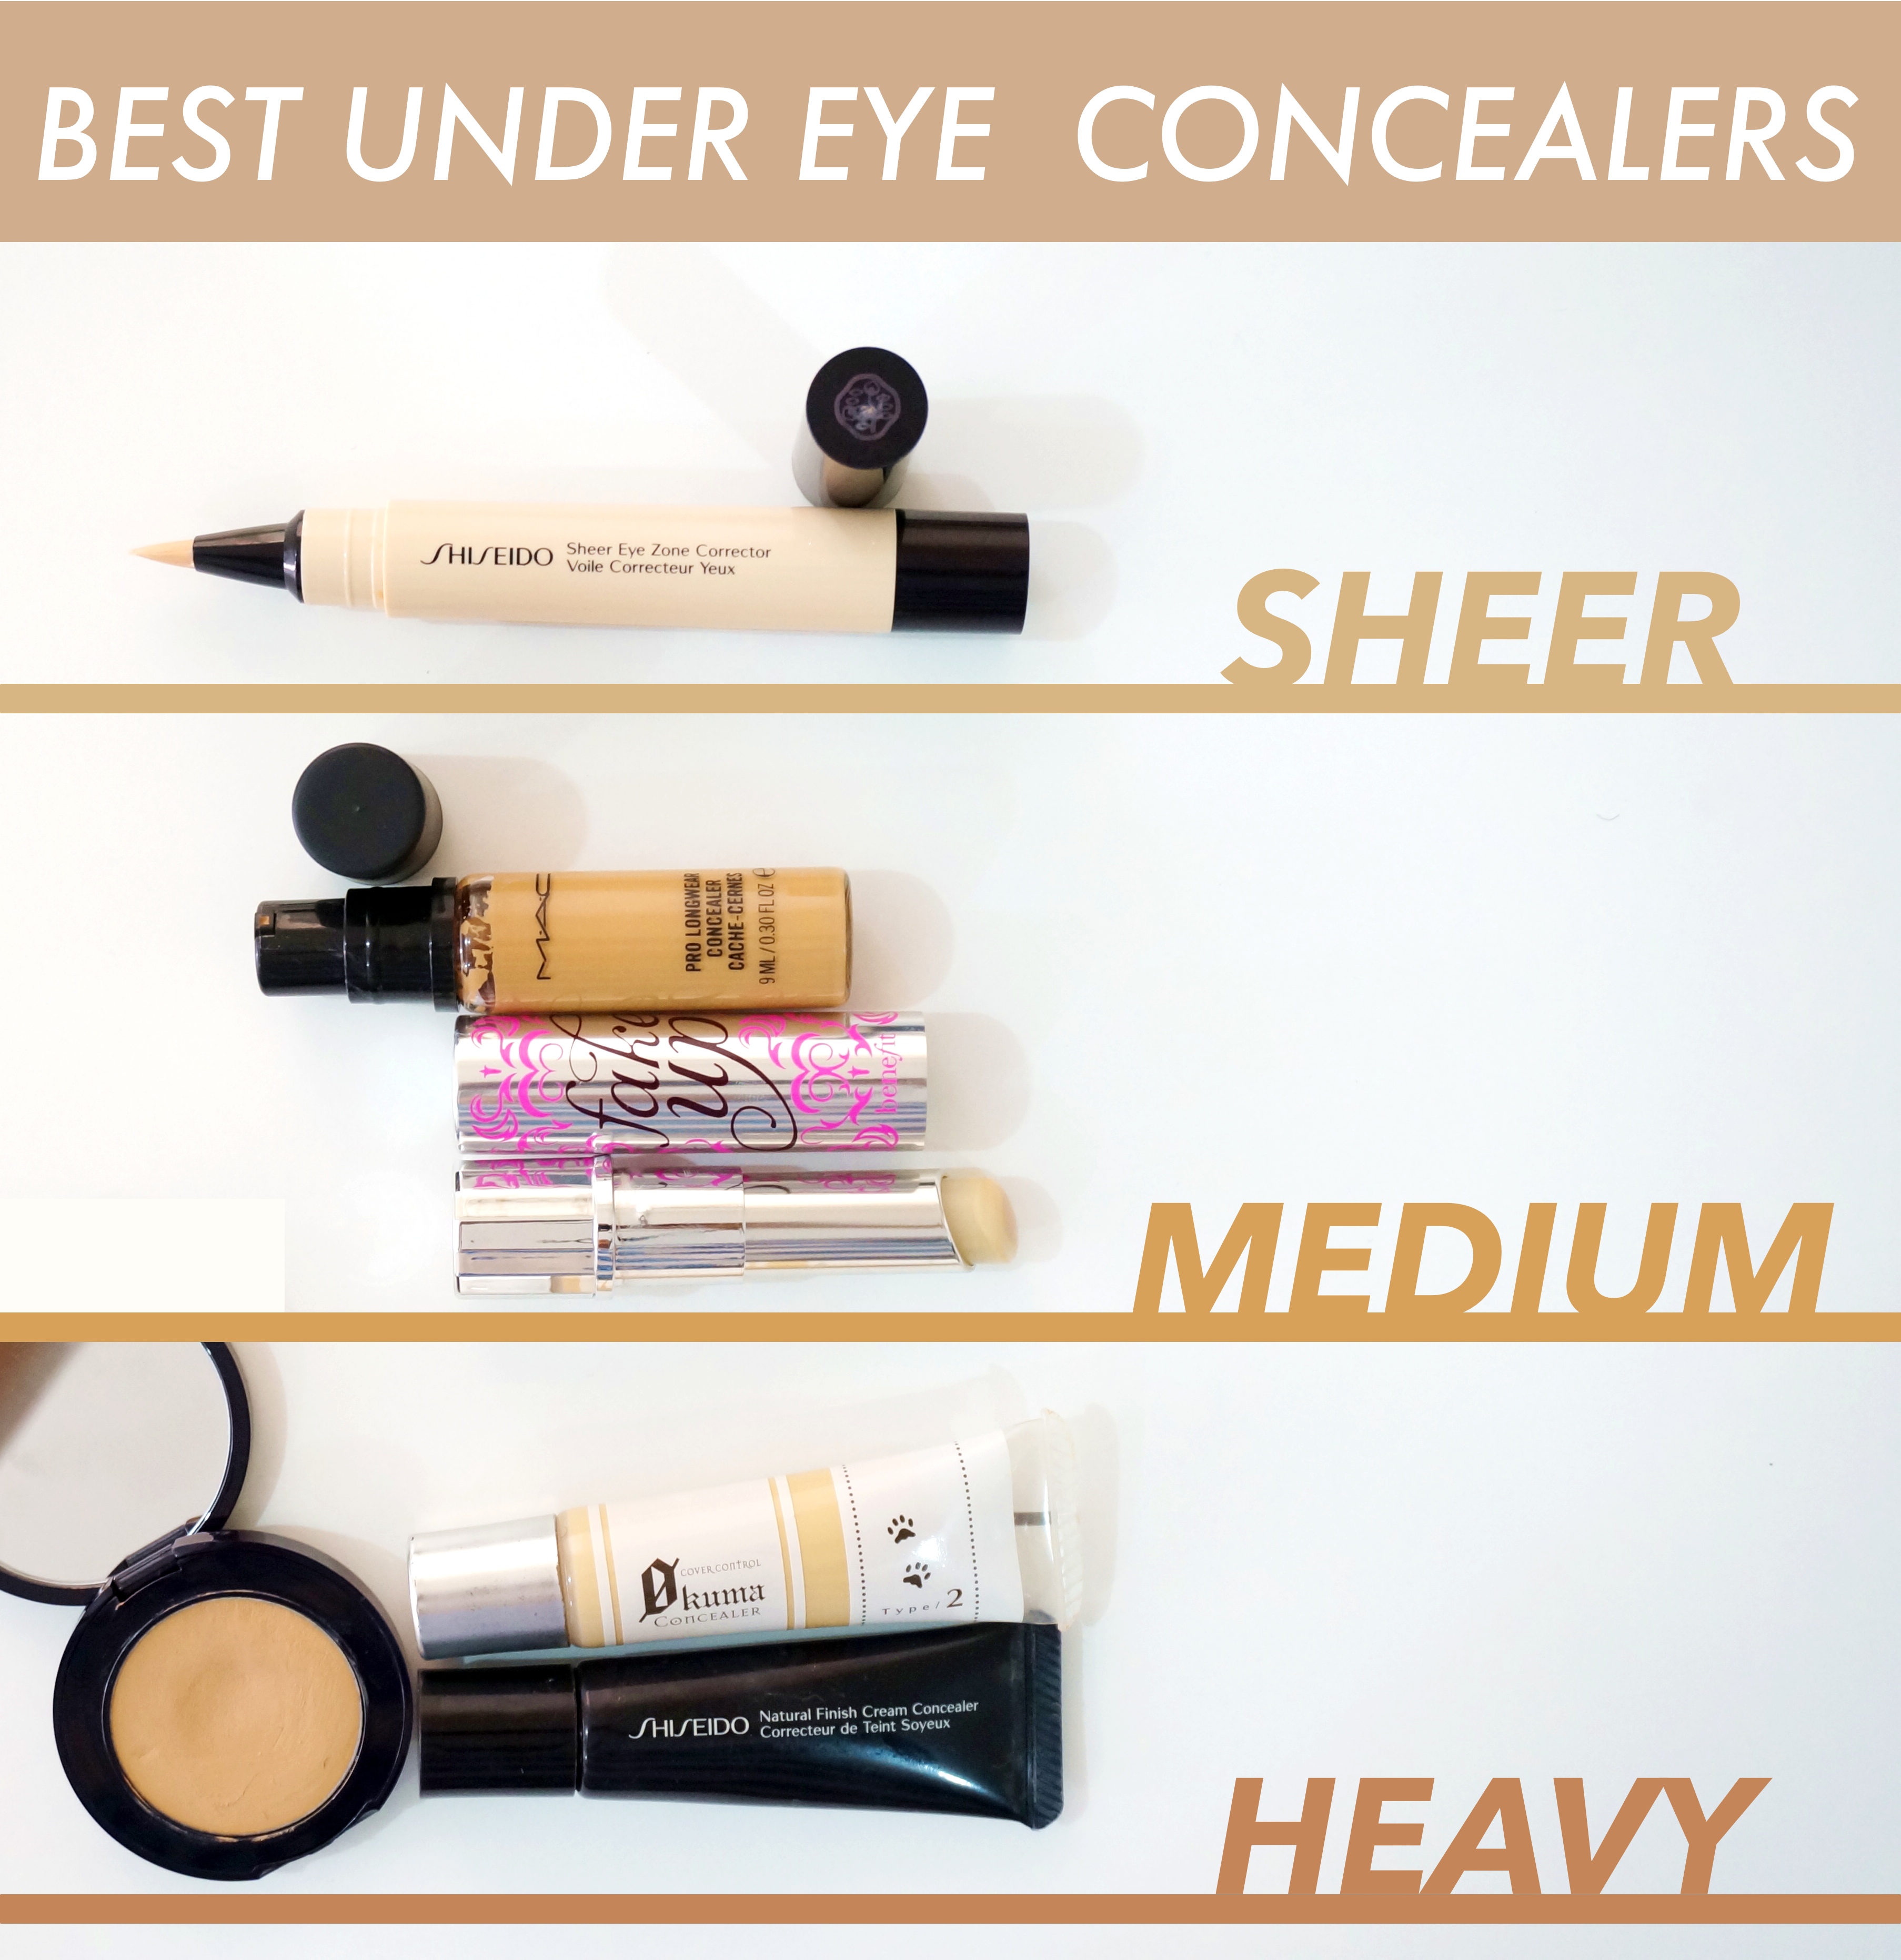 The best eye concealers try Project Vanity